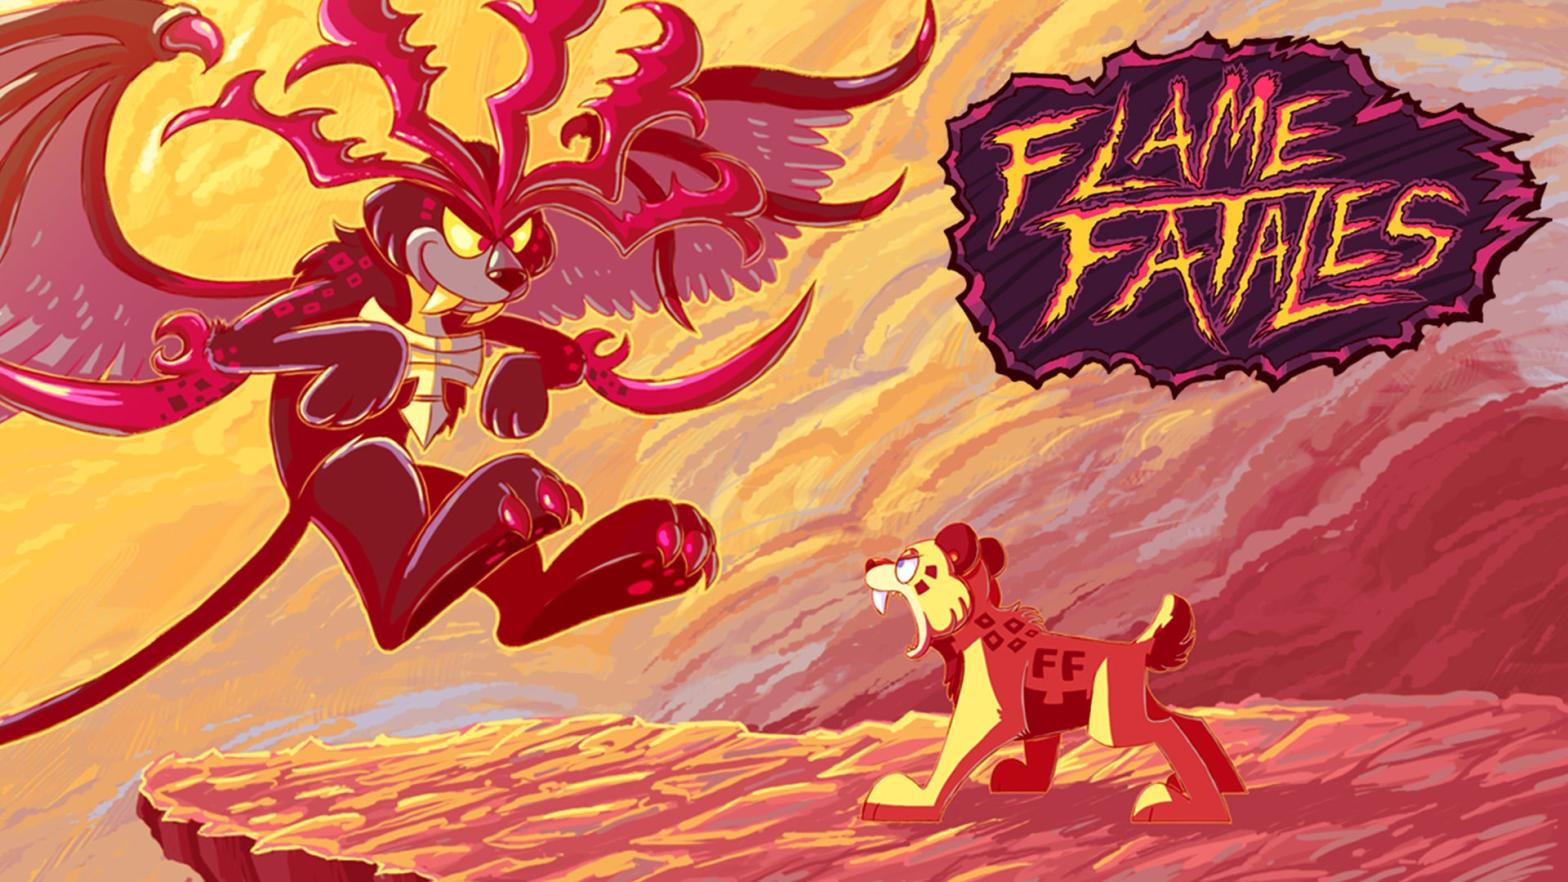 Image: GDQ / Flame Fatales